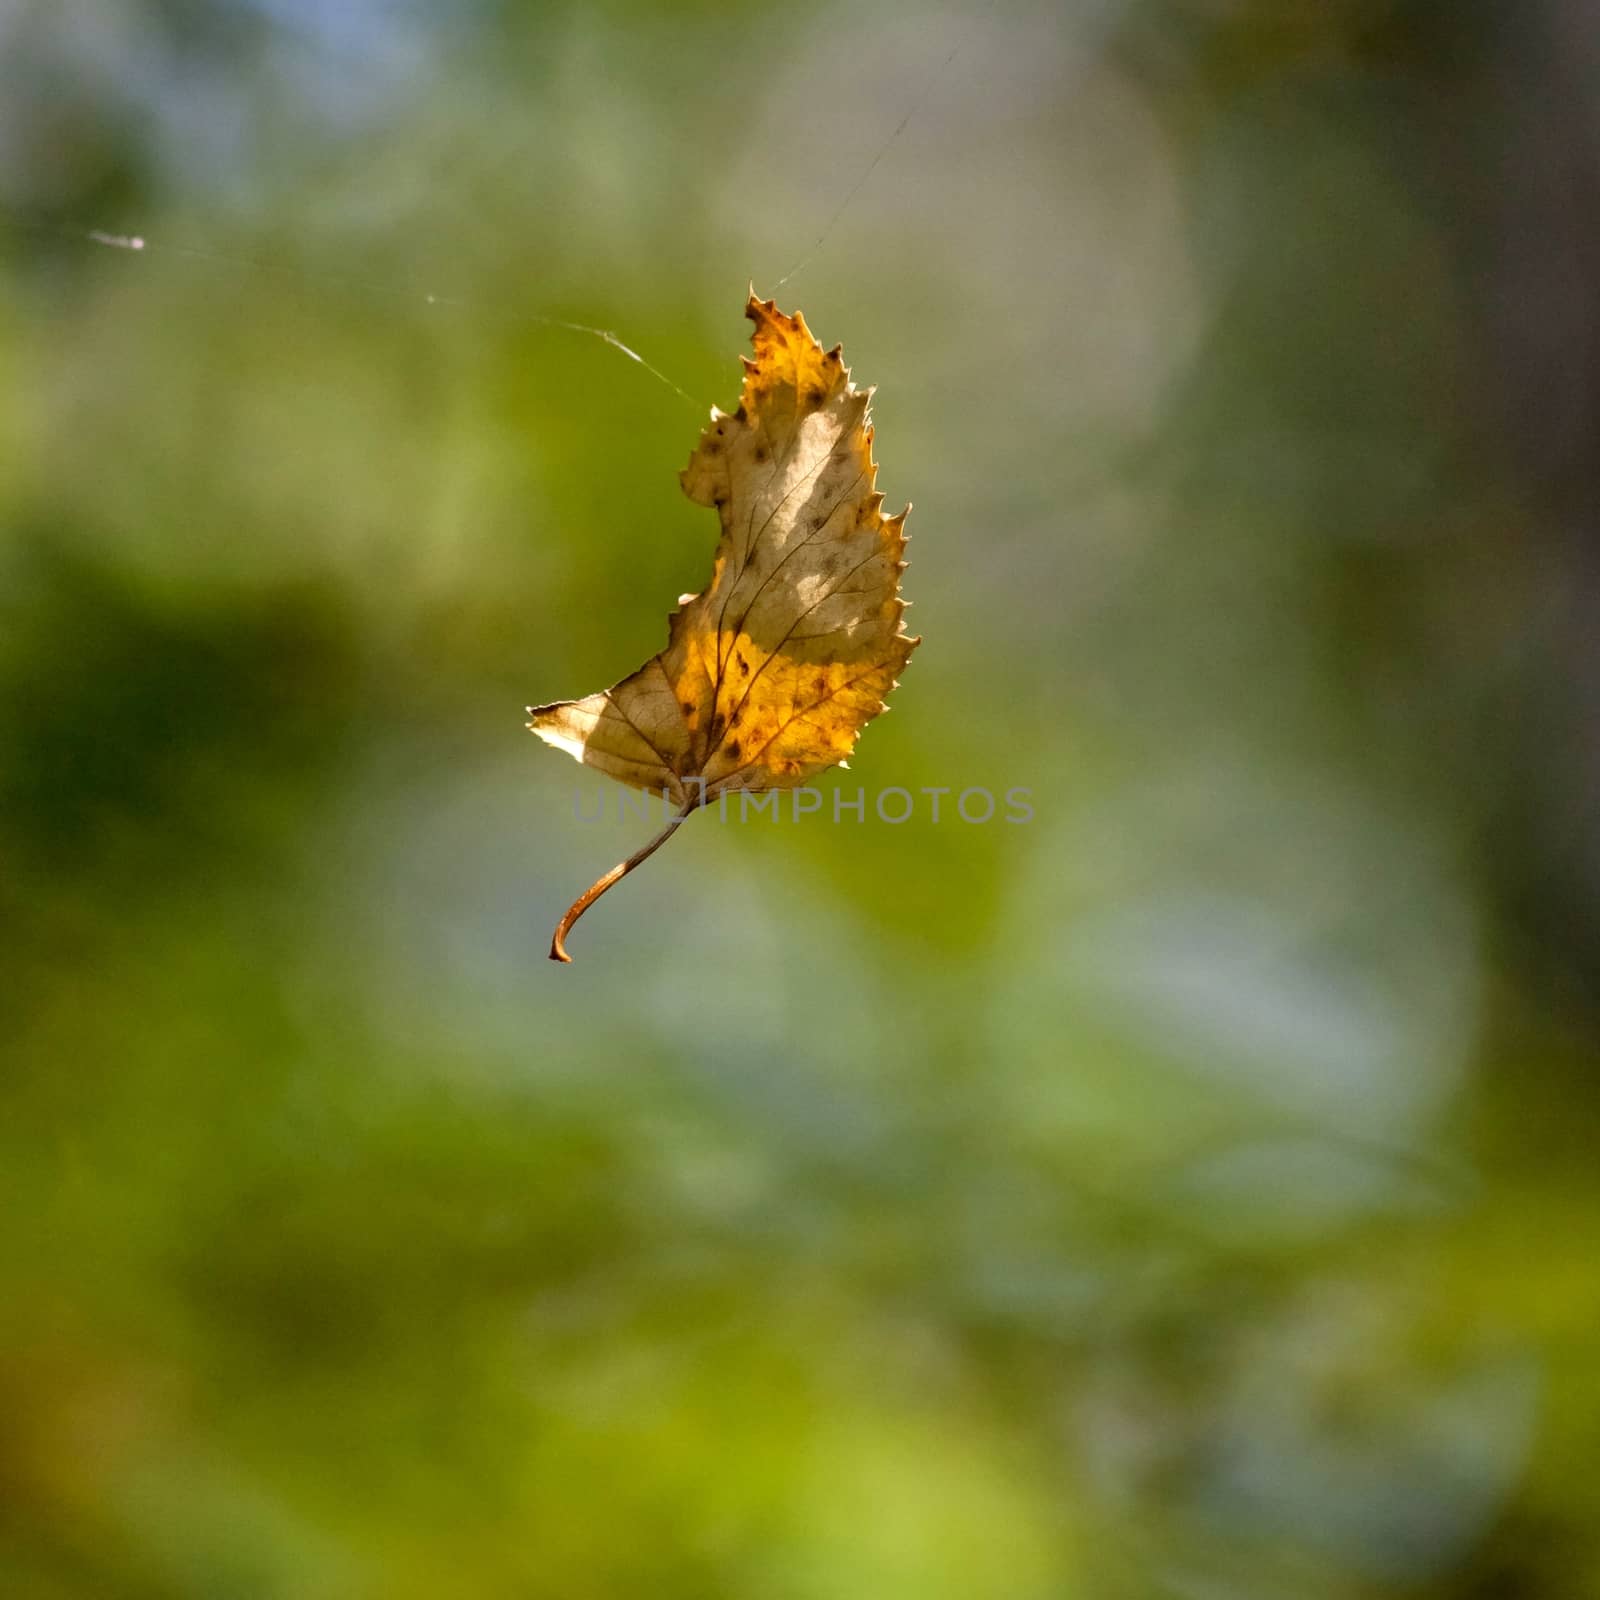 yellow autumn leaf hanging on a spider web on blurred natural background